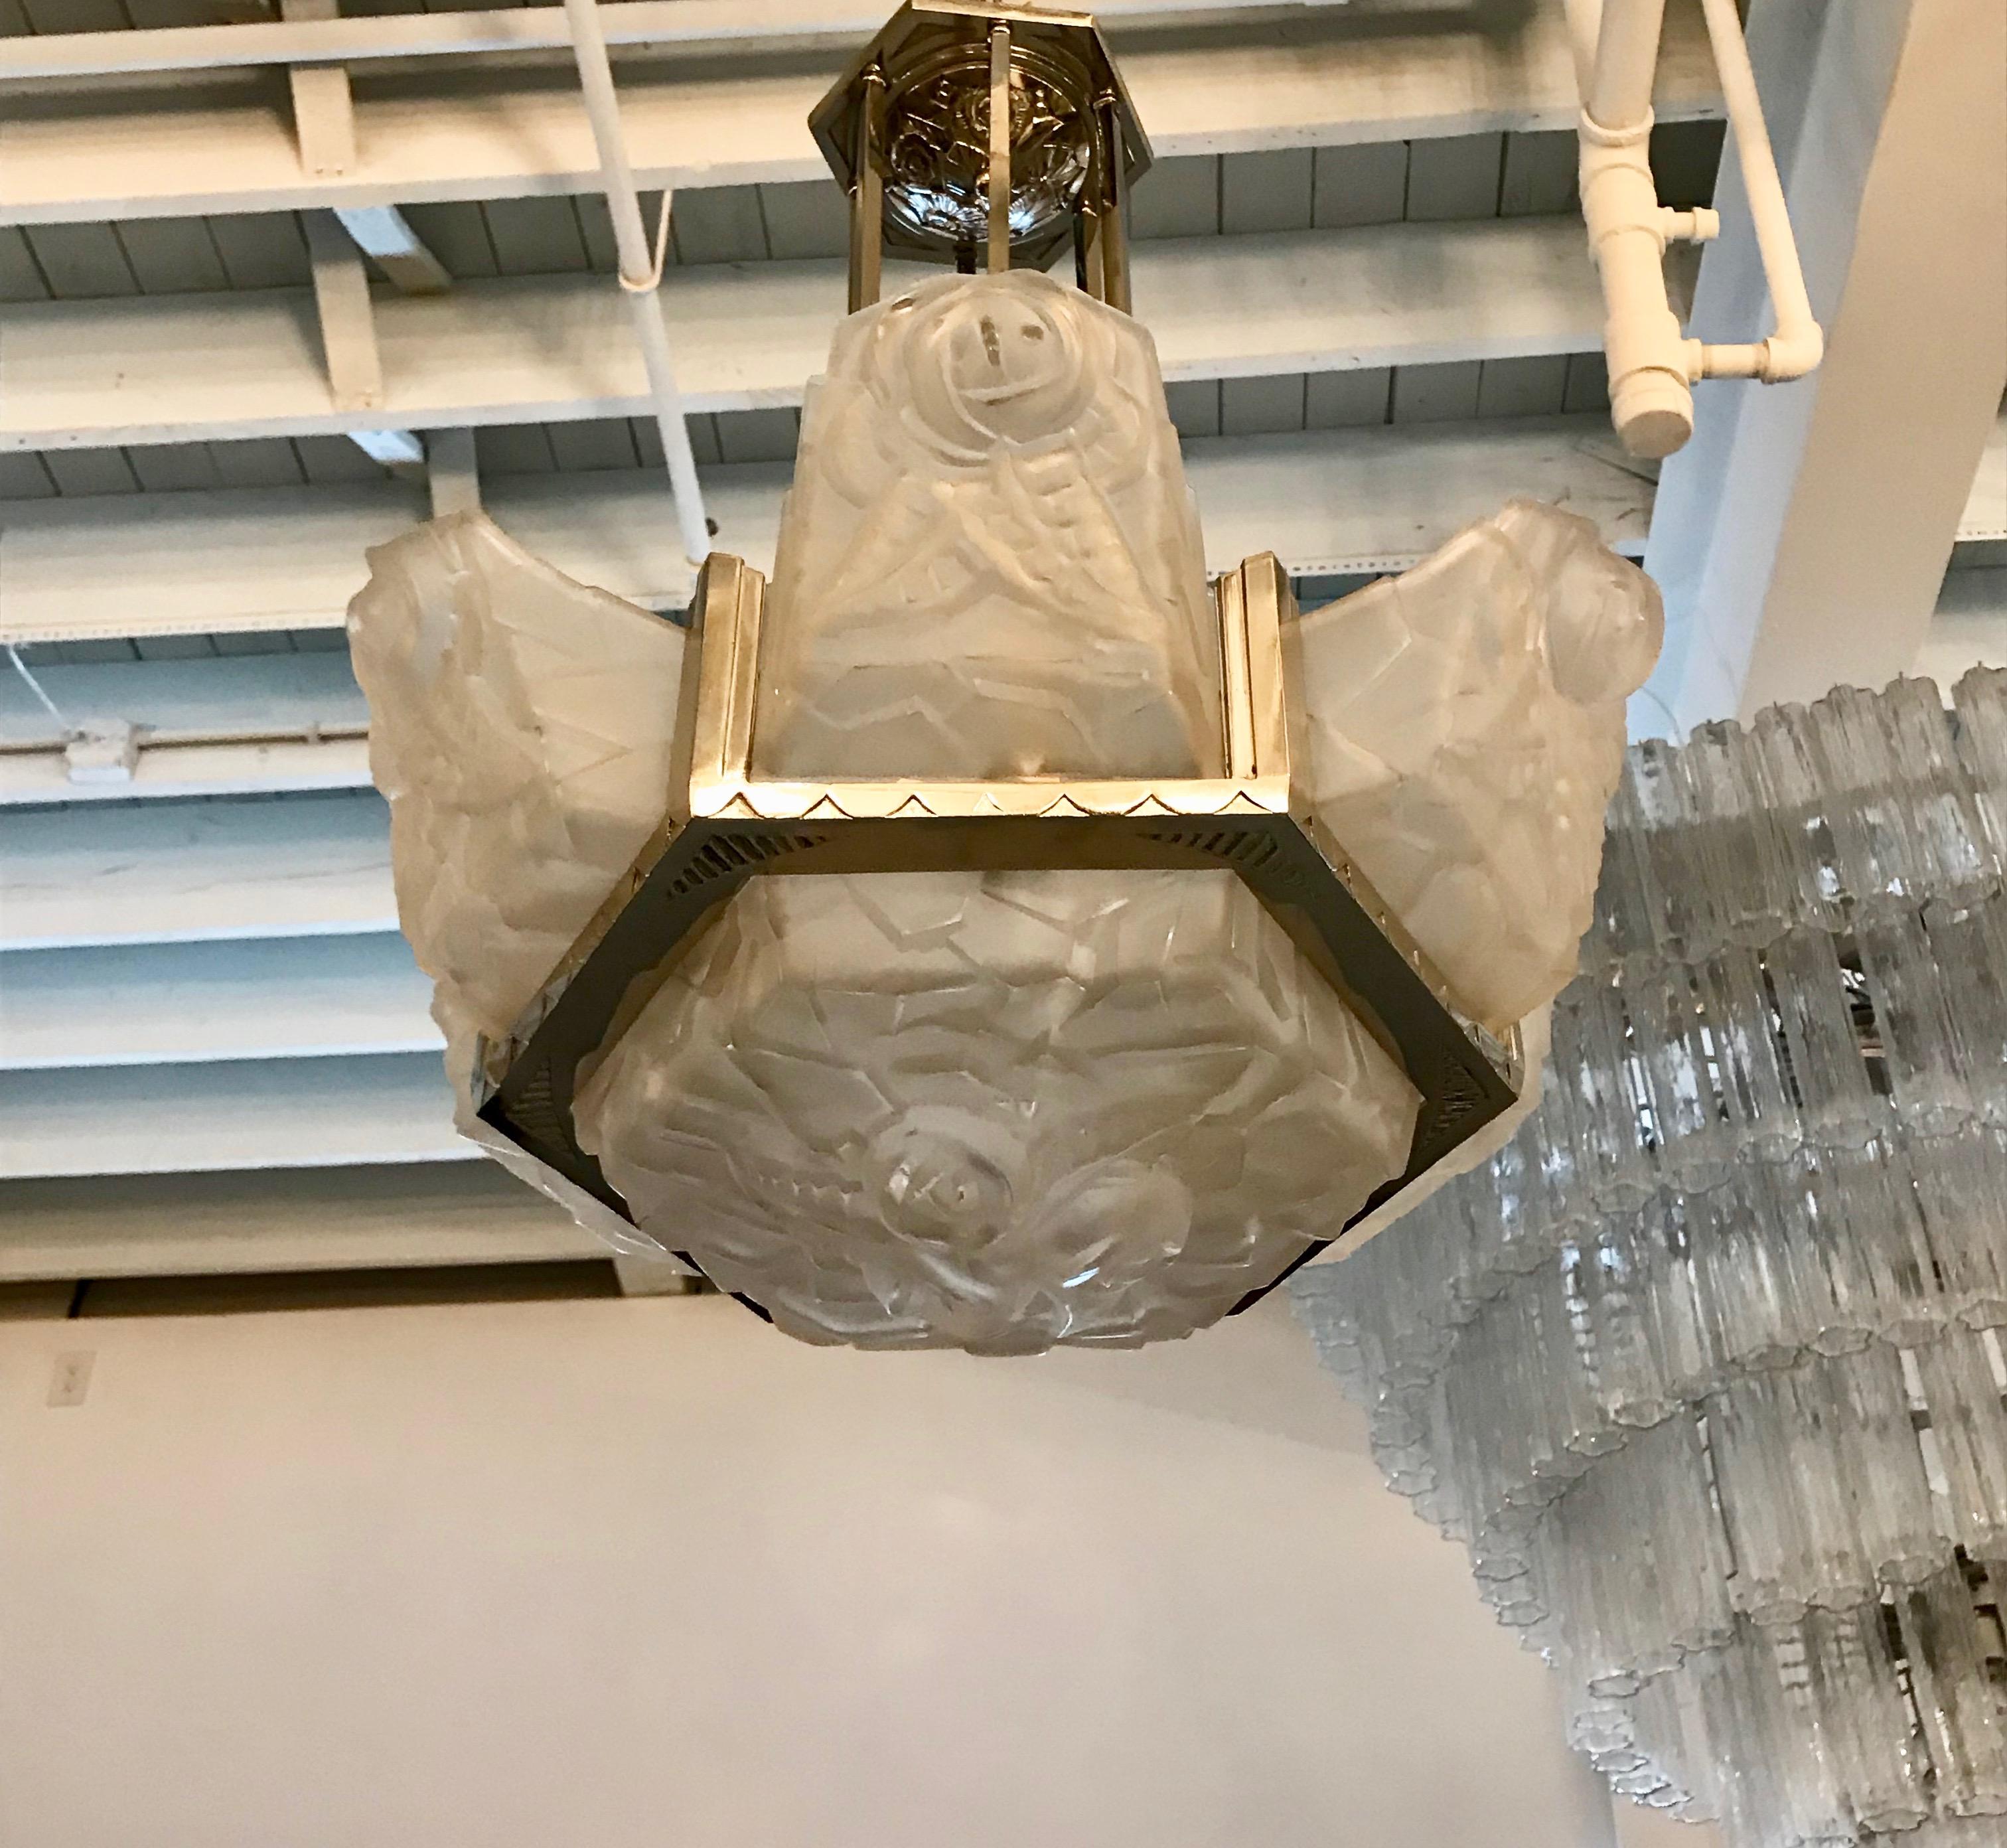 French Art Deco floral chandelier signed by Degué. Six outer clear frosted glass panels with floral motif with a matching centre glass bowl. Held by a streamline deco nickel polished design frame. The ceiling plate has a beautiful deco floral motif.